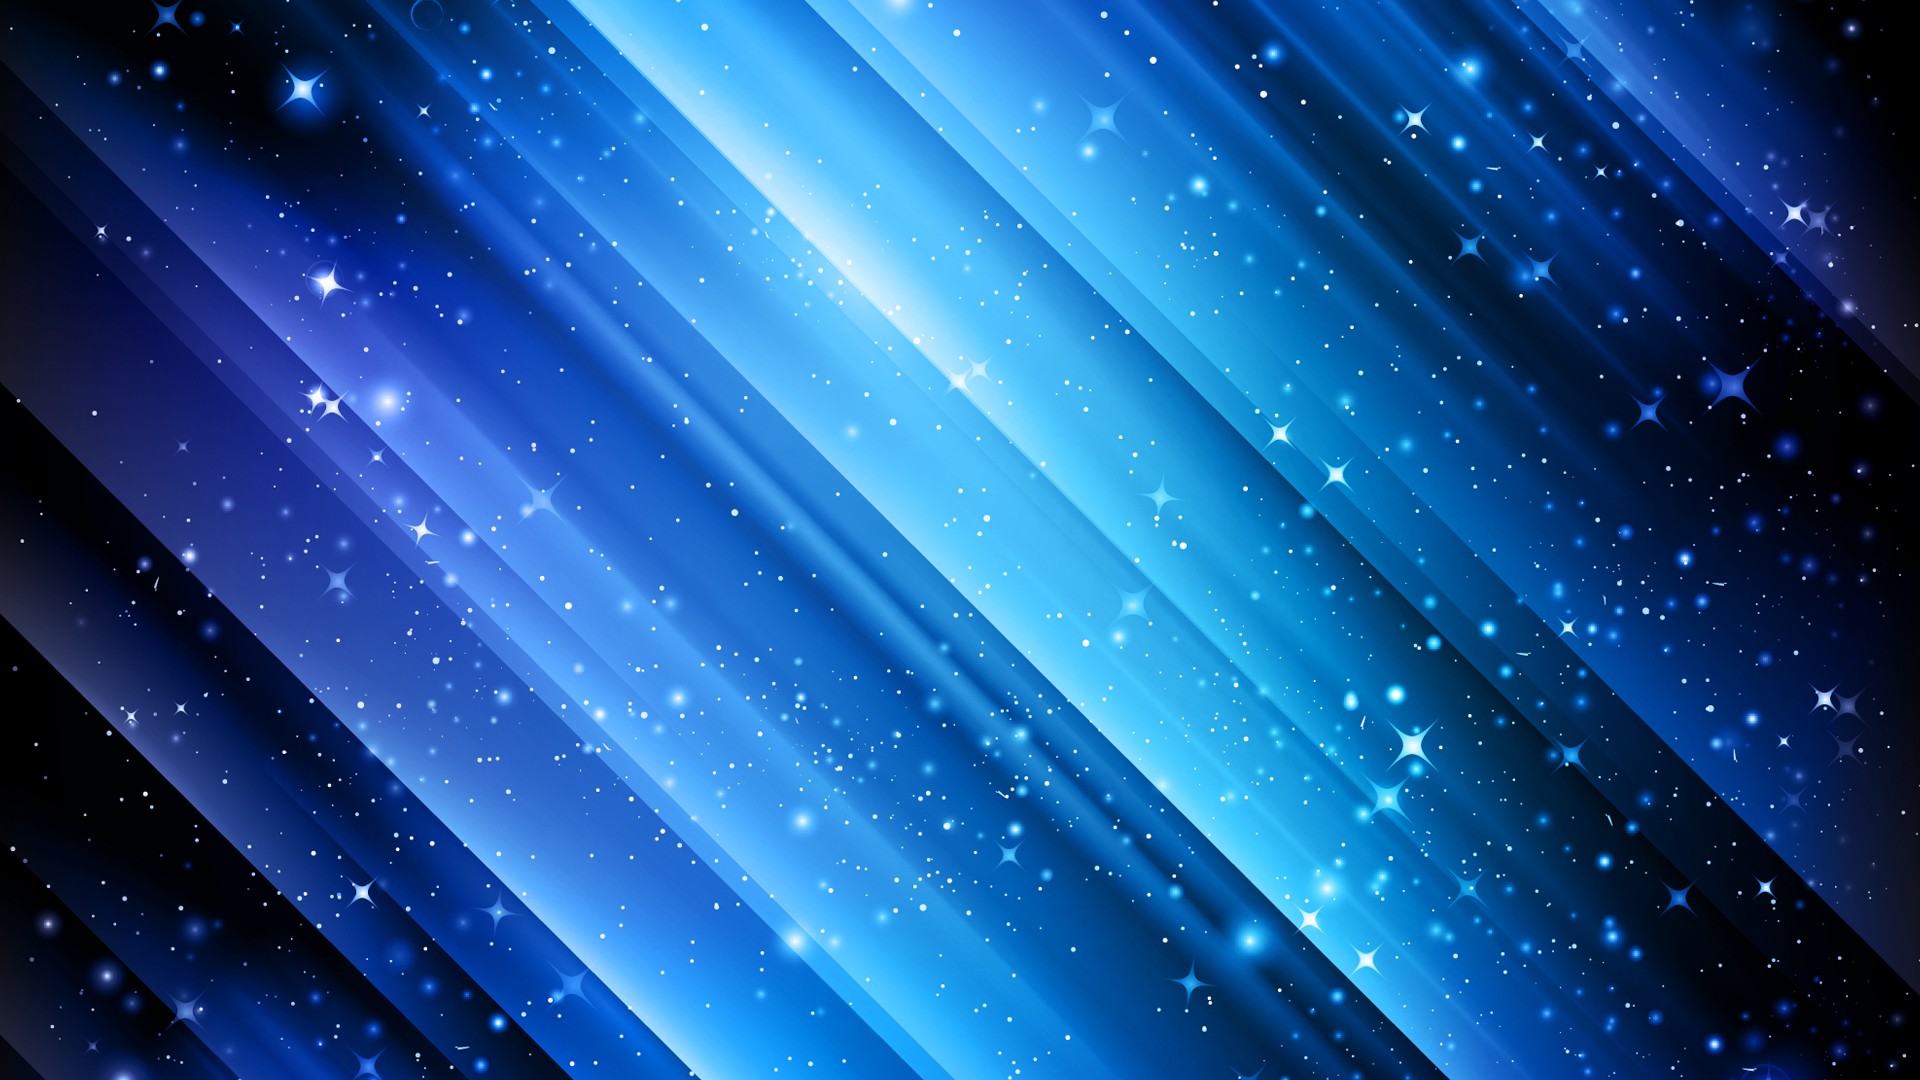 abstract, Blue, Winter, Snow, Stars, Vectors, Lines, Graphics